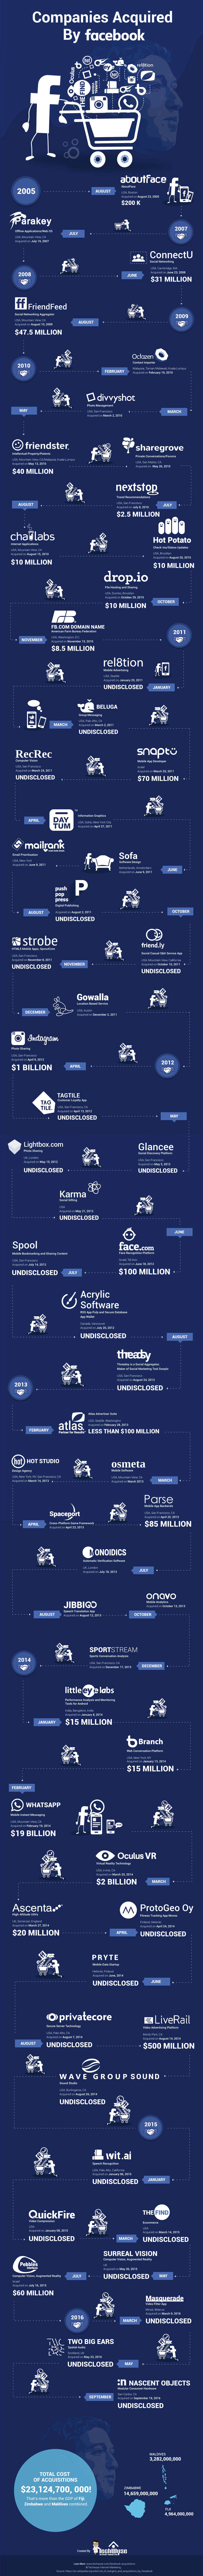 Facebook List of Companies Owned Infographic